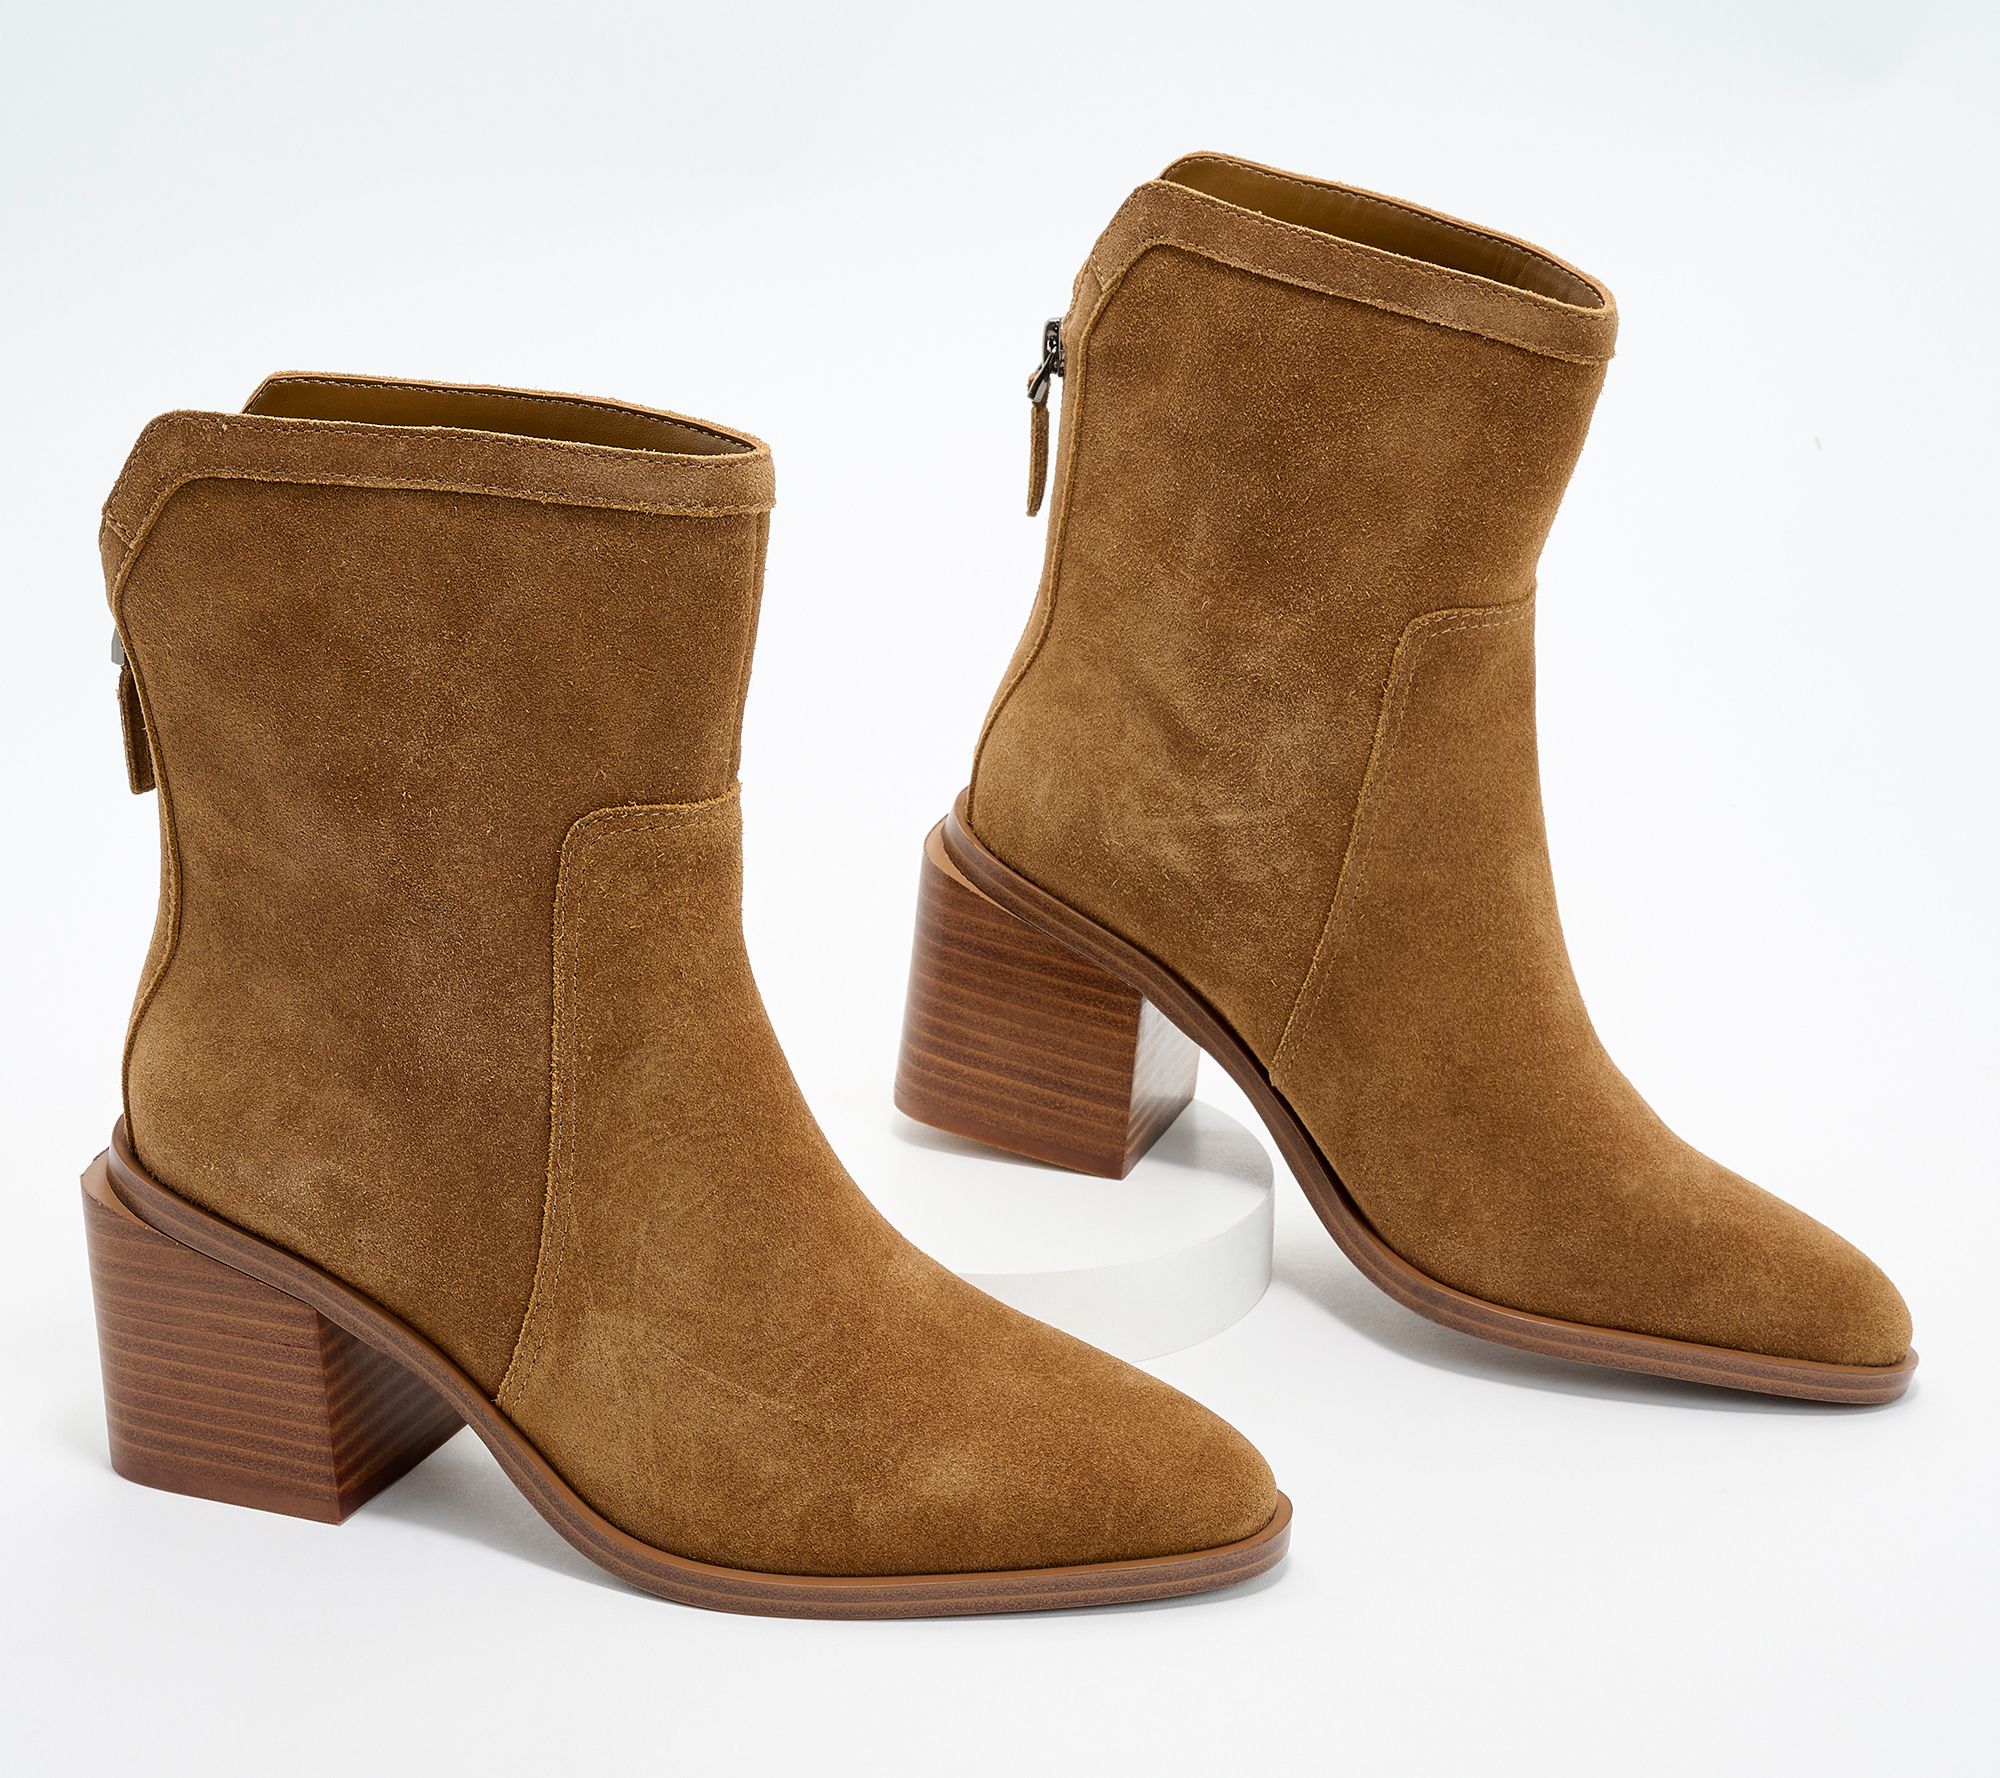 Vionic Water-Repellent Suede Ankle Boots - Roseland